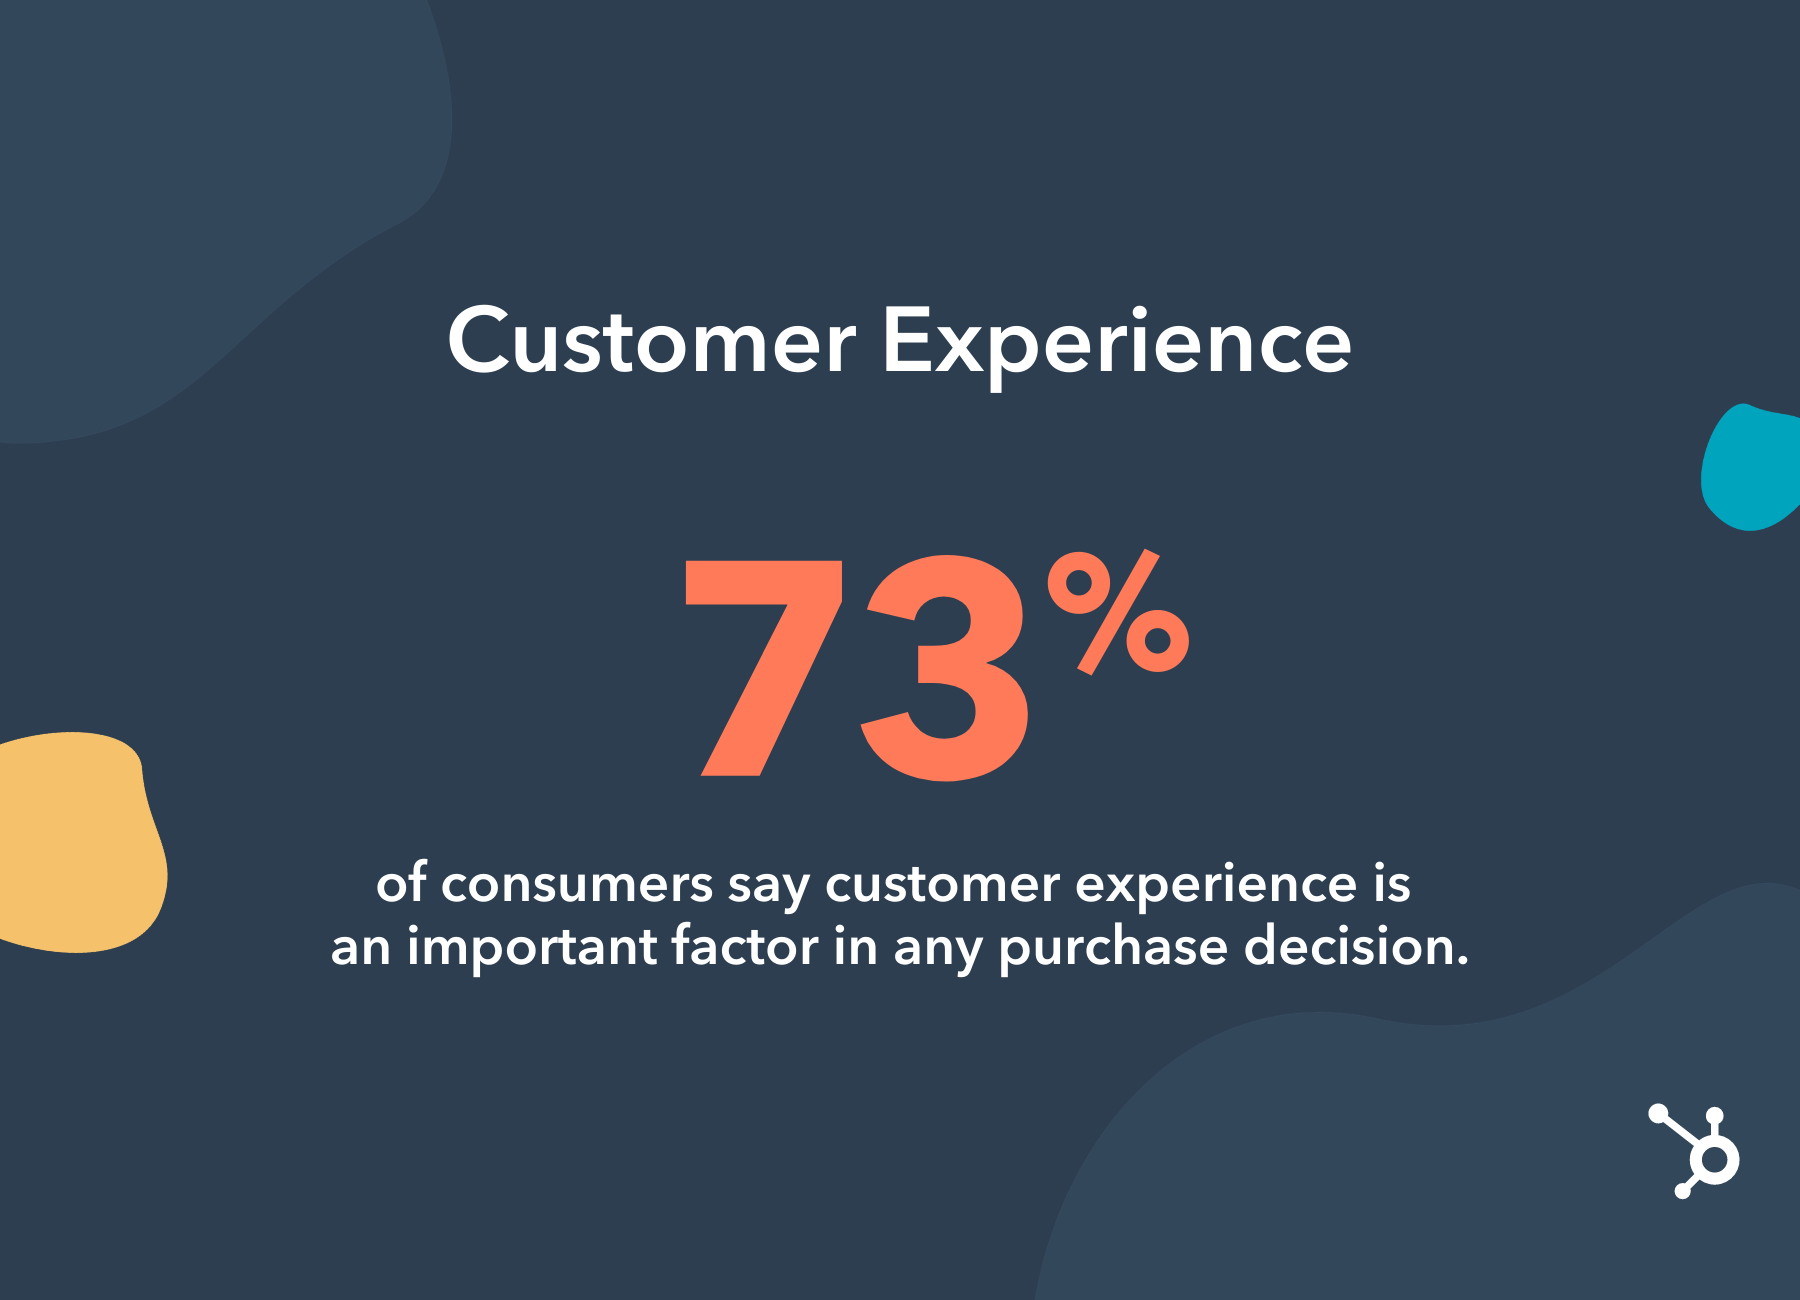 statistic seventy three percent of consumers say customer experience is an important factor in any purchase decision